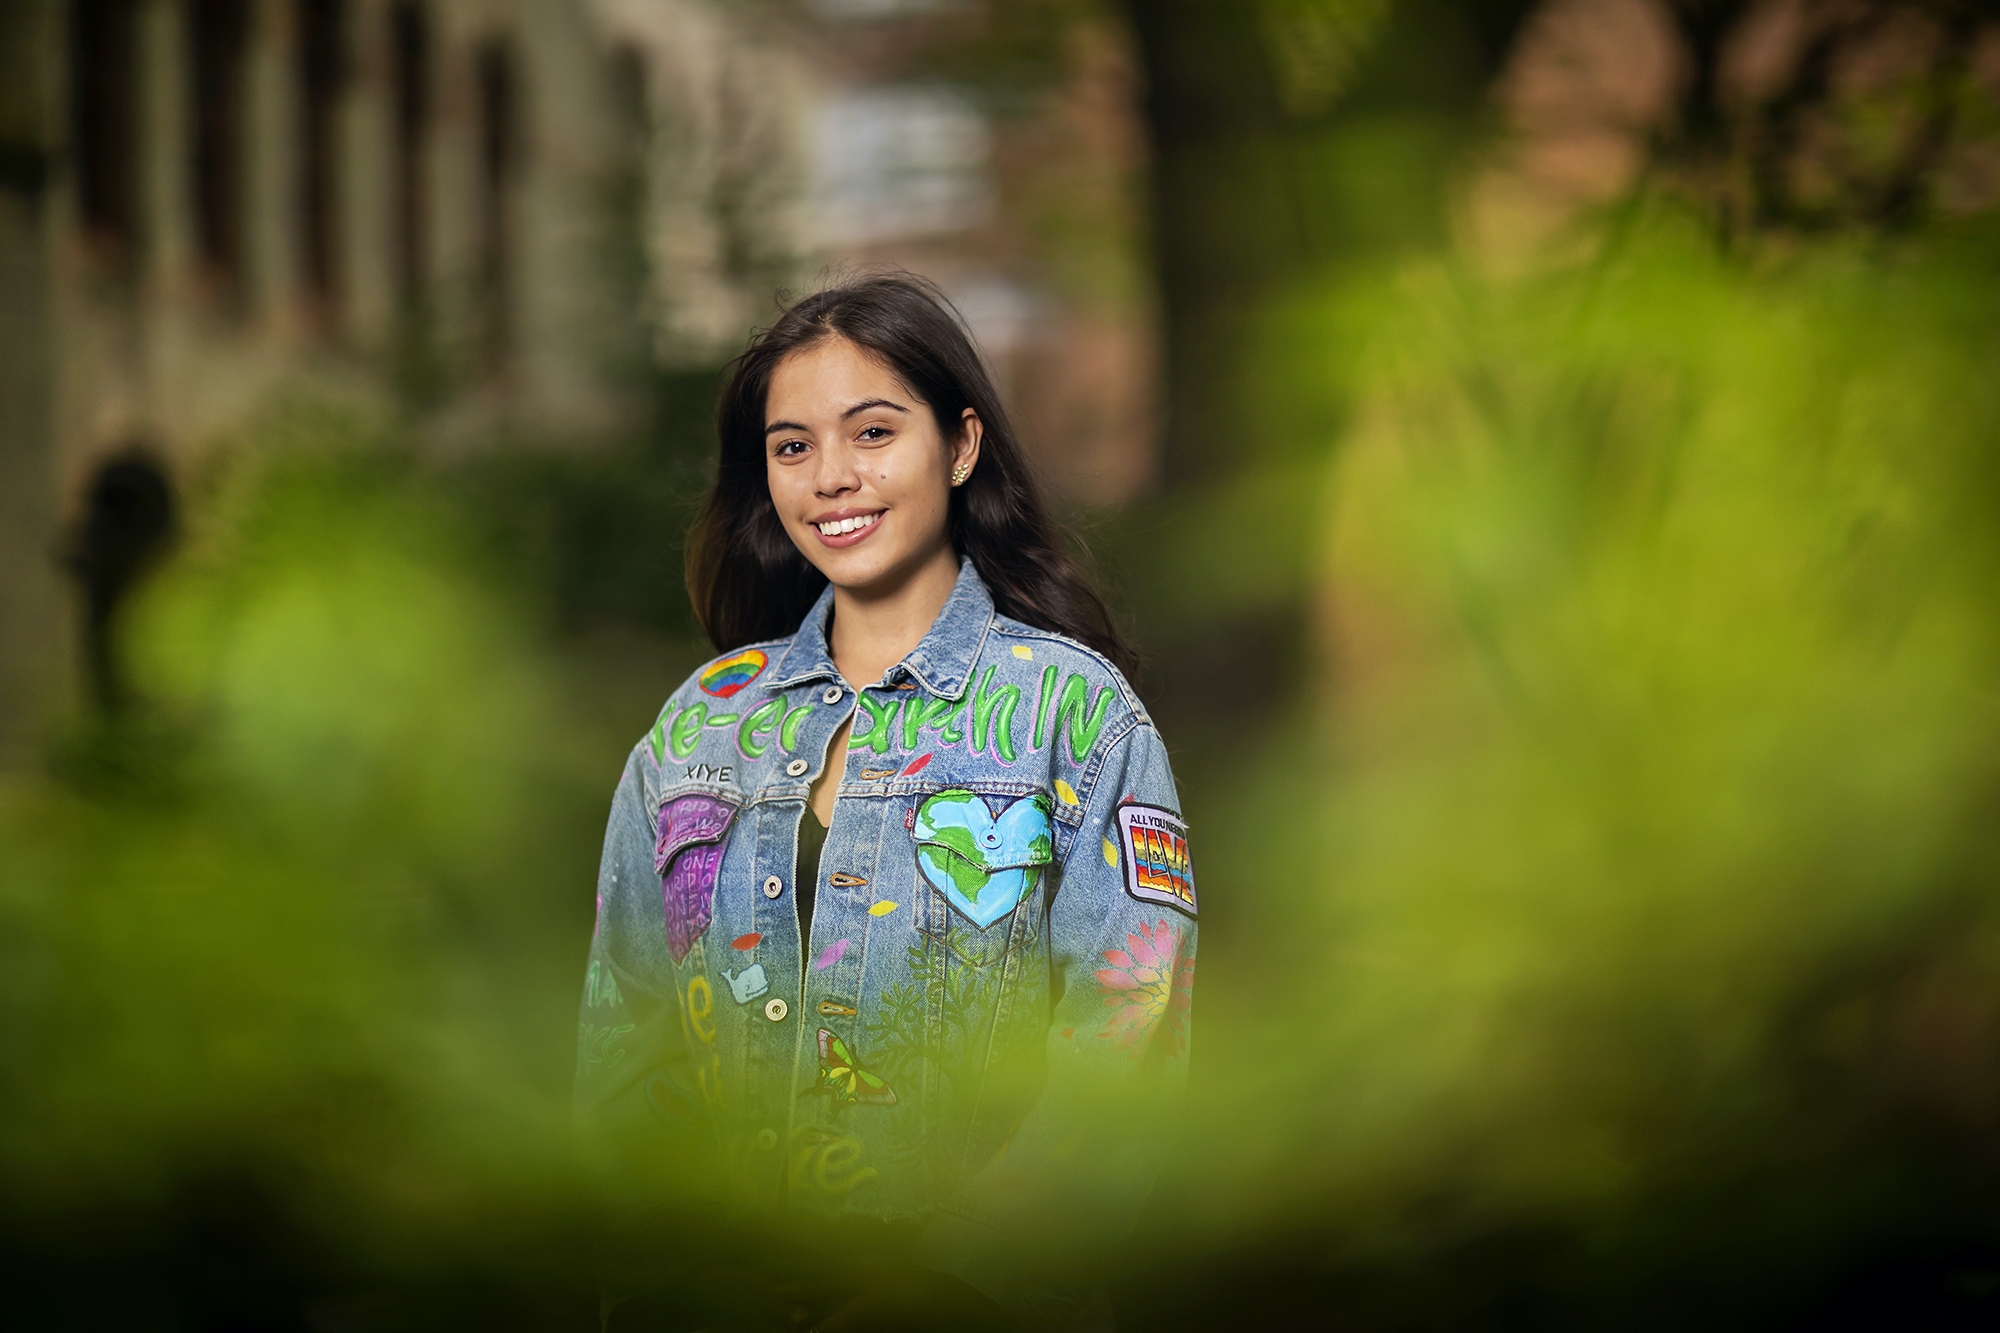 A college-age person standing outside, with greenery blurred in the front of the image. She is wearing a jean jacket with the words "Re-earth IN," a globe in the shape of a heart, and other earth-related designs. 